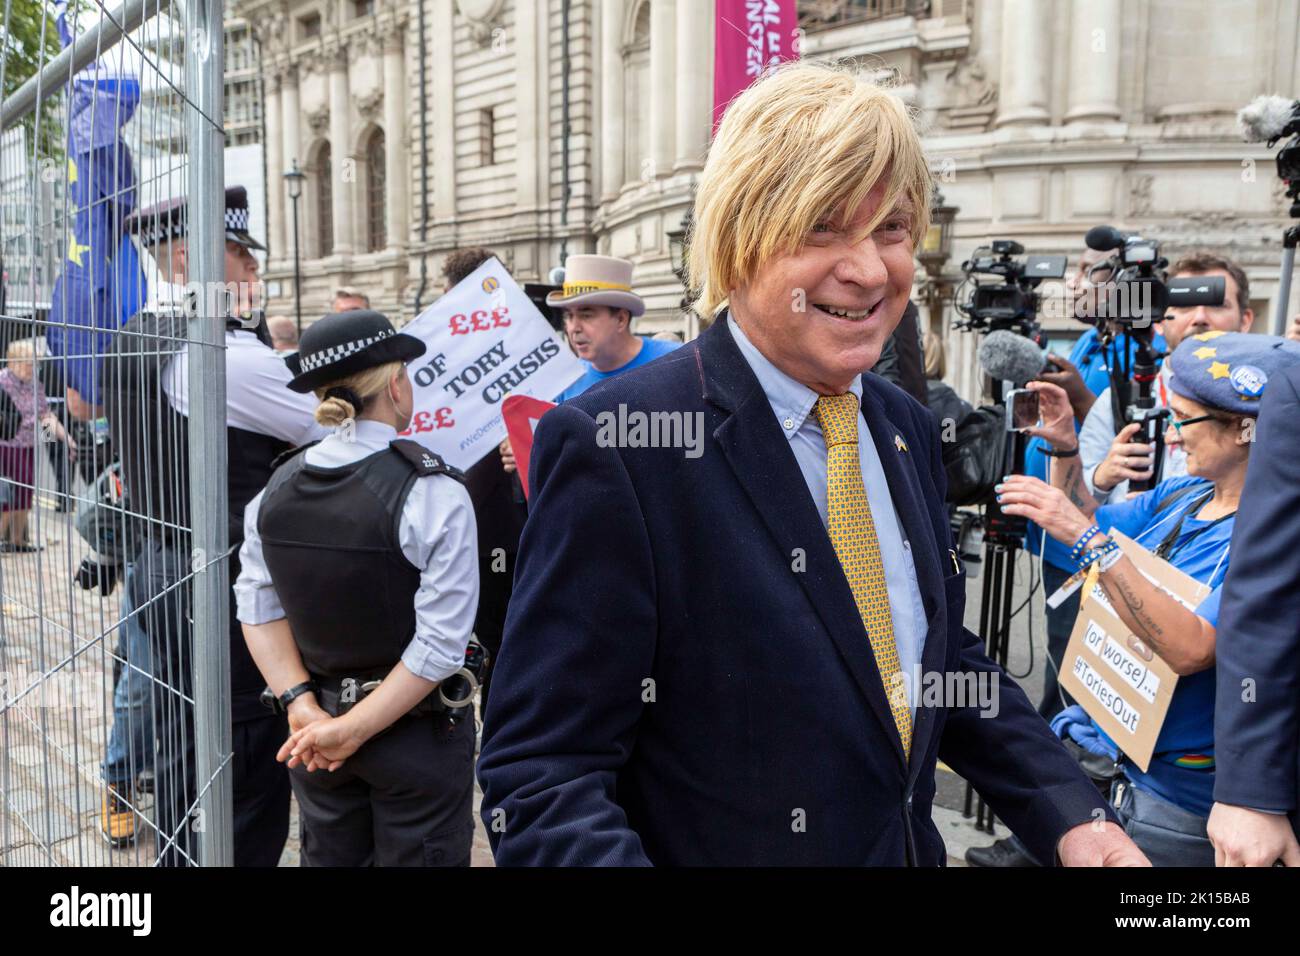 Newly elected Tory leader is announced at Queen Elizabeth II Conference Centre this afternoon. Protestors are seen outside the venue haggling minister Stock Photo